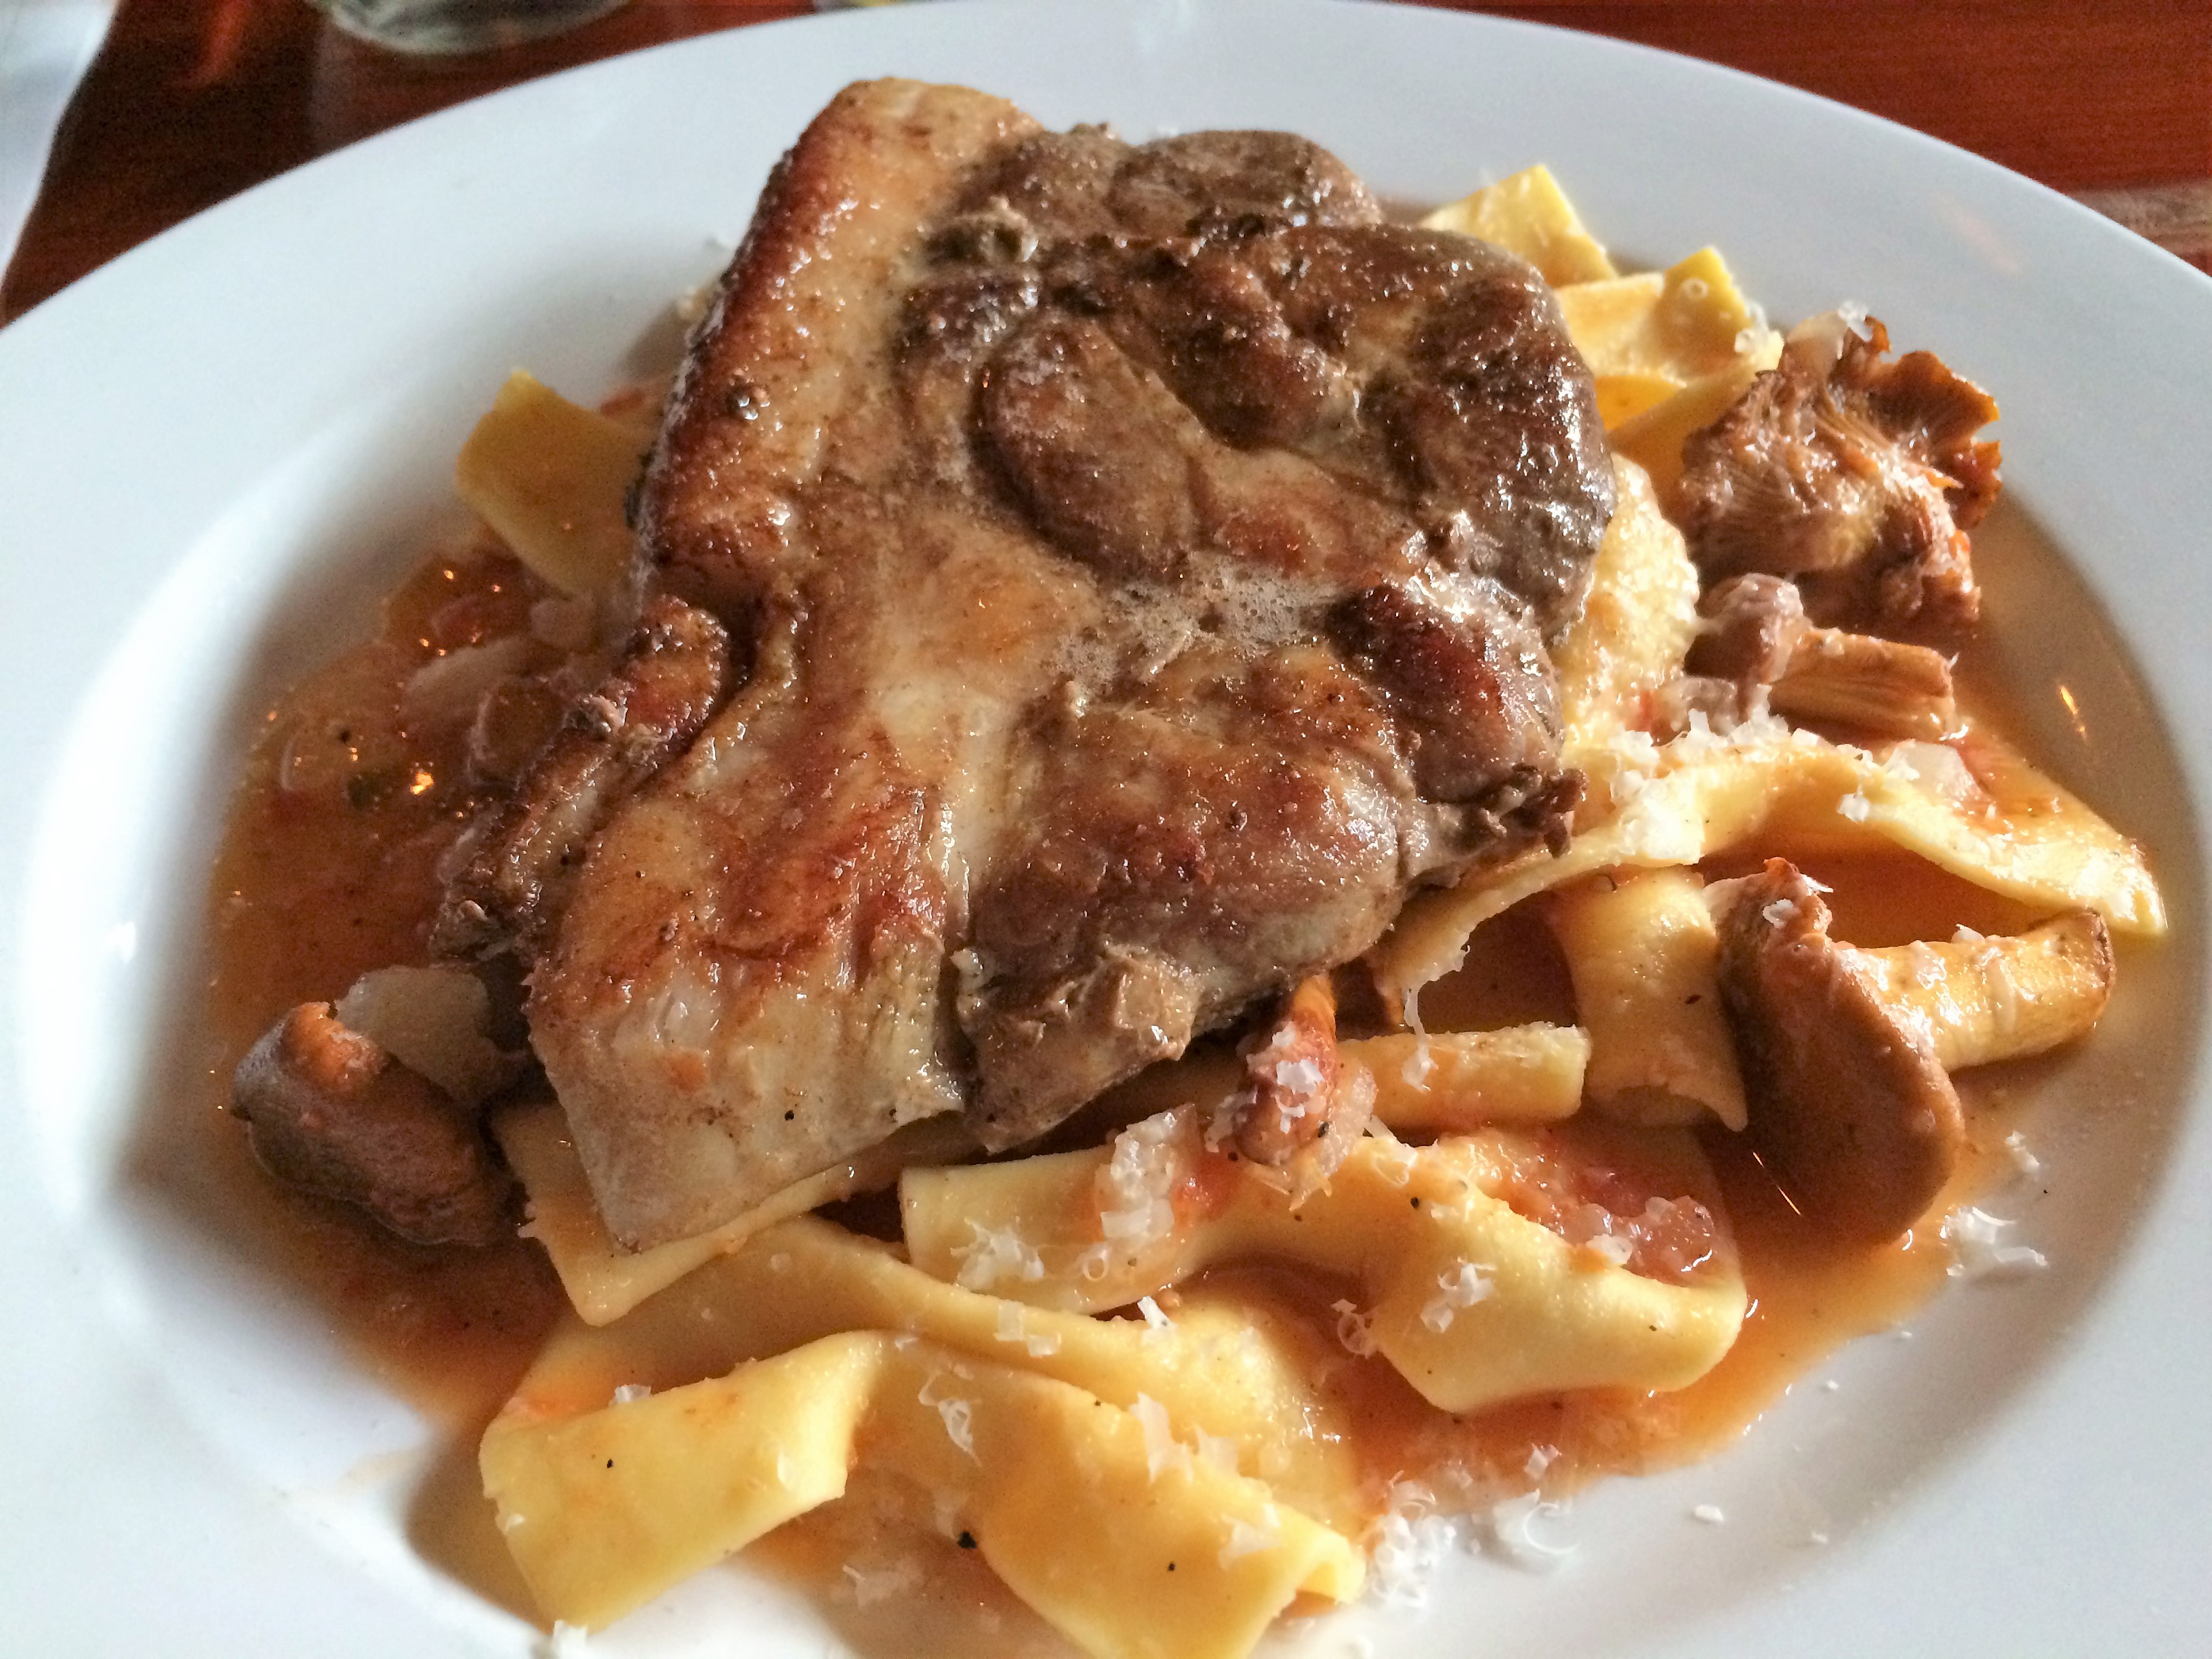 Pork Steak on a bed of mushrooms, tomato and farfalle.